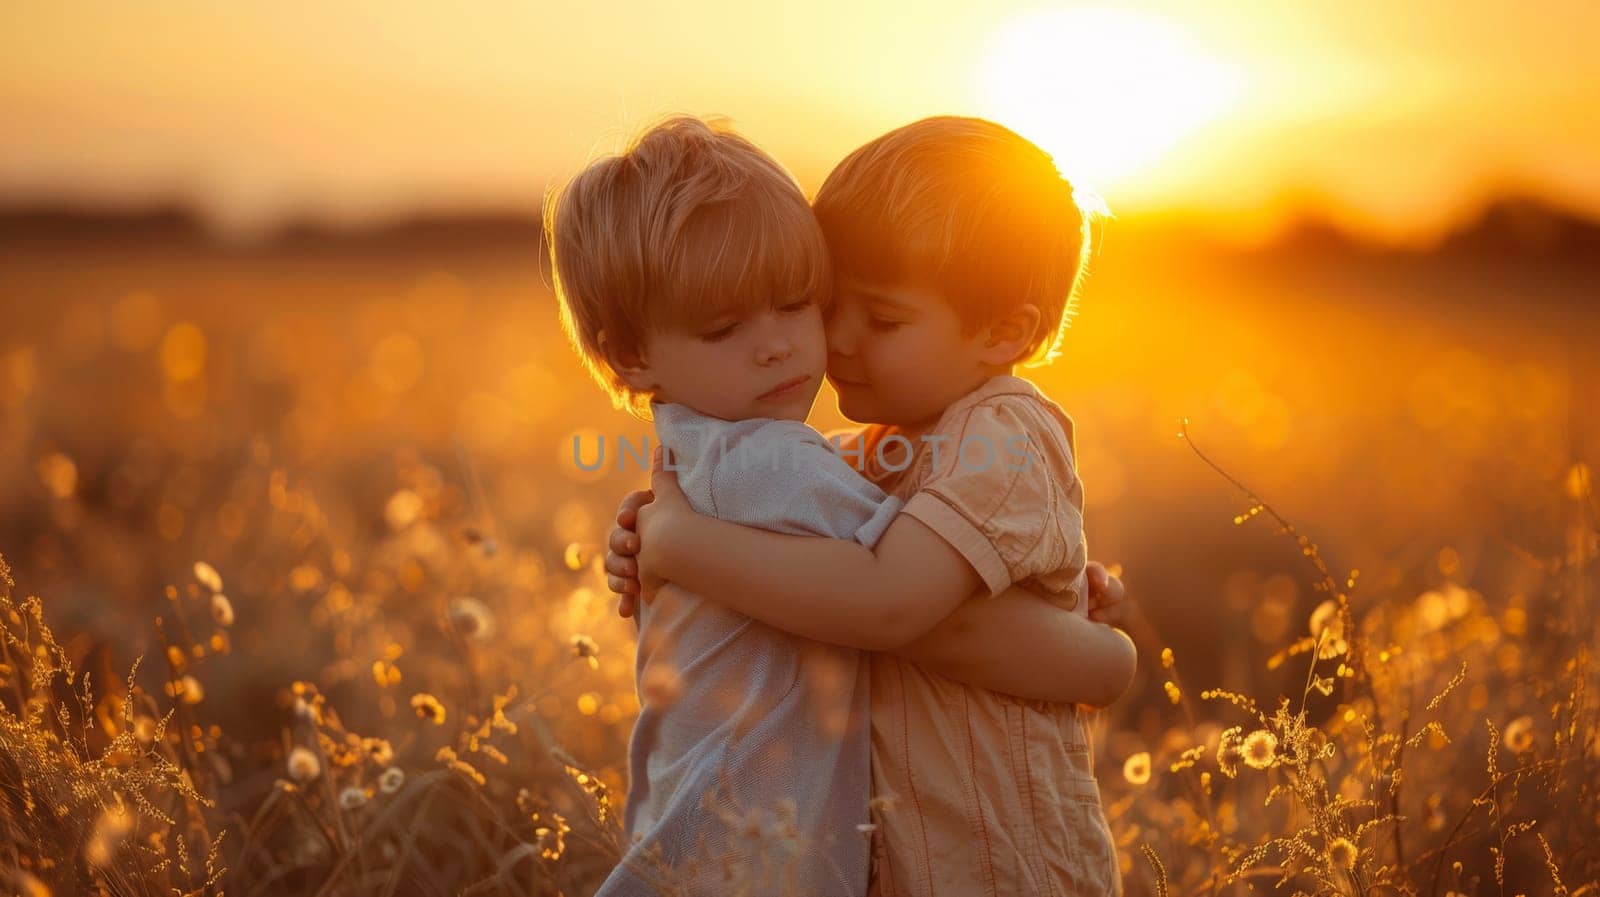 Two young boys hugging each other in a field at sunset, AI by starush